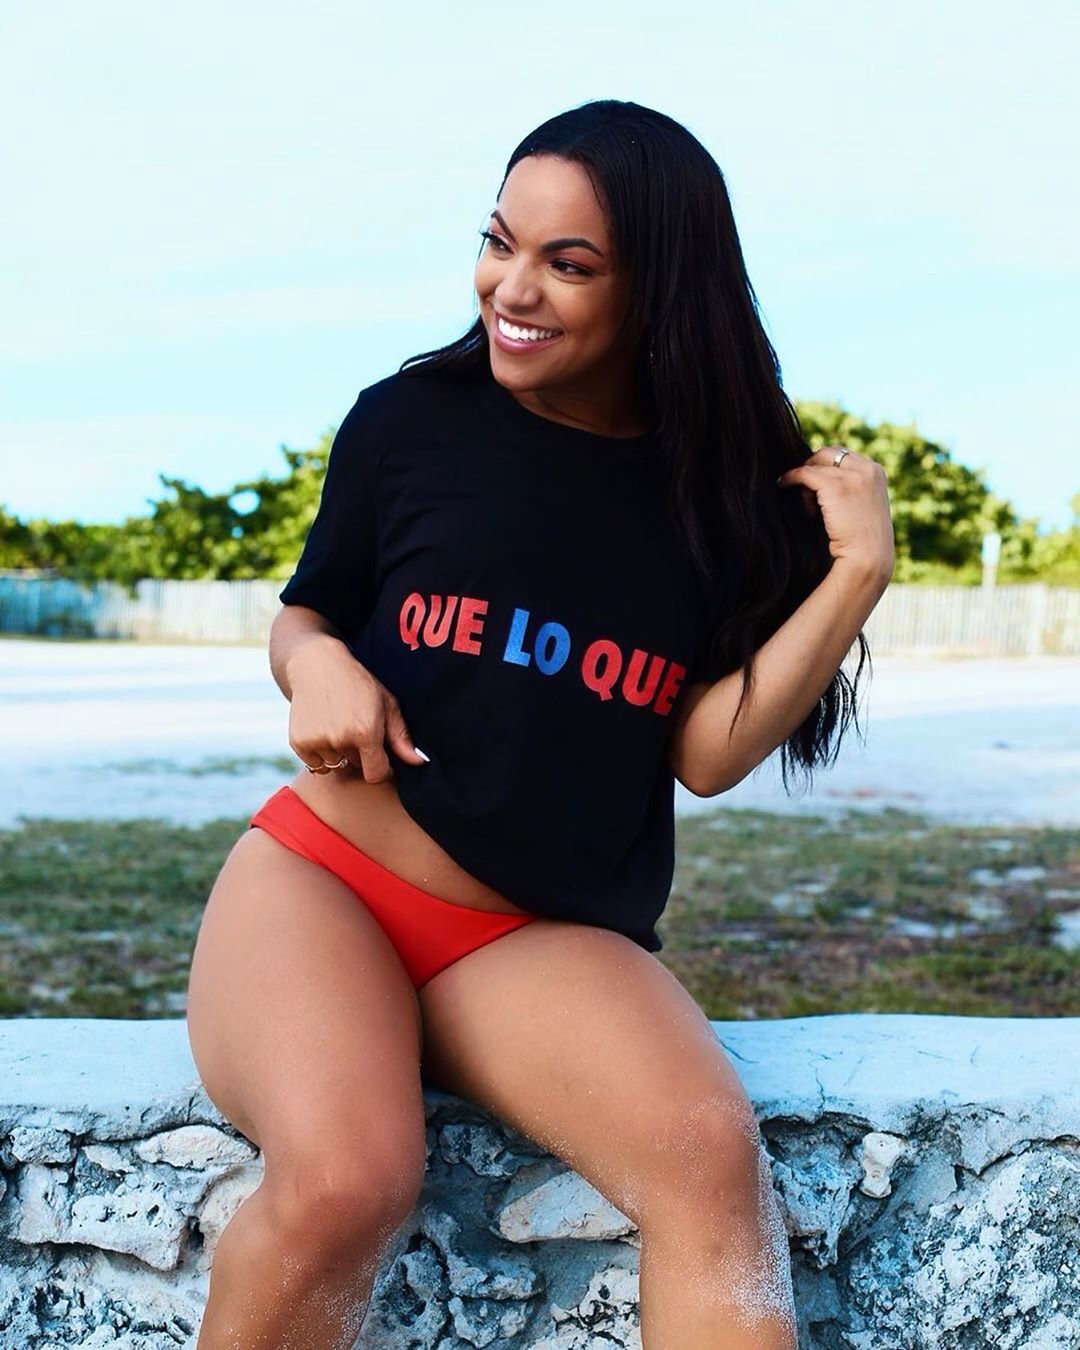 Que Lo Que Unisex T-Shirt  - 2020 - DominicanGirlfriend.com - Frases Dominicanas - República Dominicana Lifestyle Graphic T-Shirts Streetwear & Accessories - New York - Bronx - Washington Heights - Miami - Florida - Boca Chica - USA - Dominican Clothing